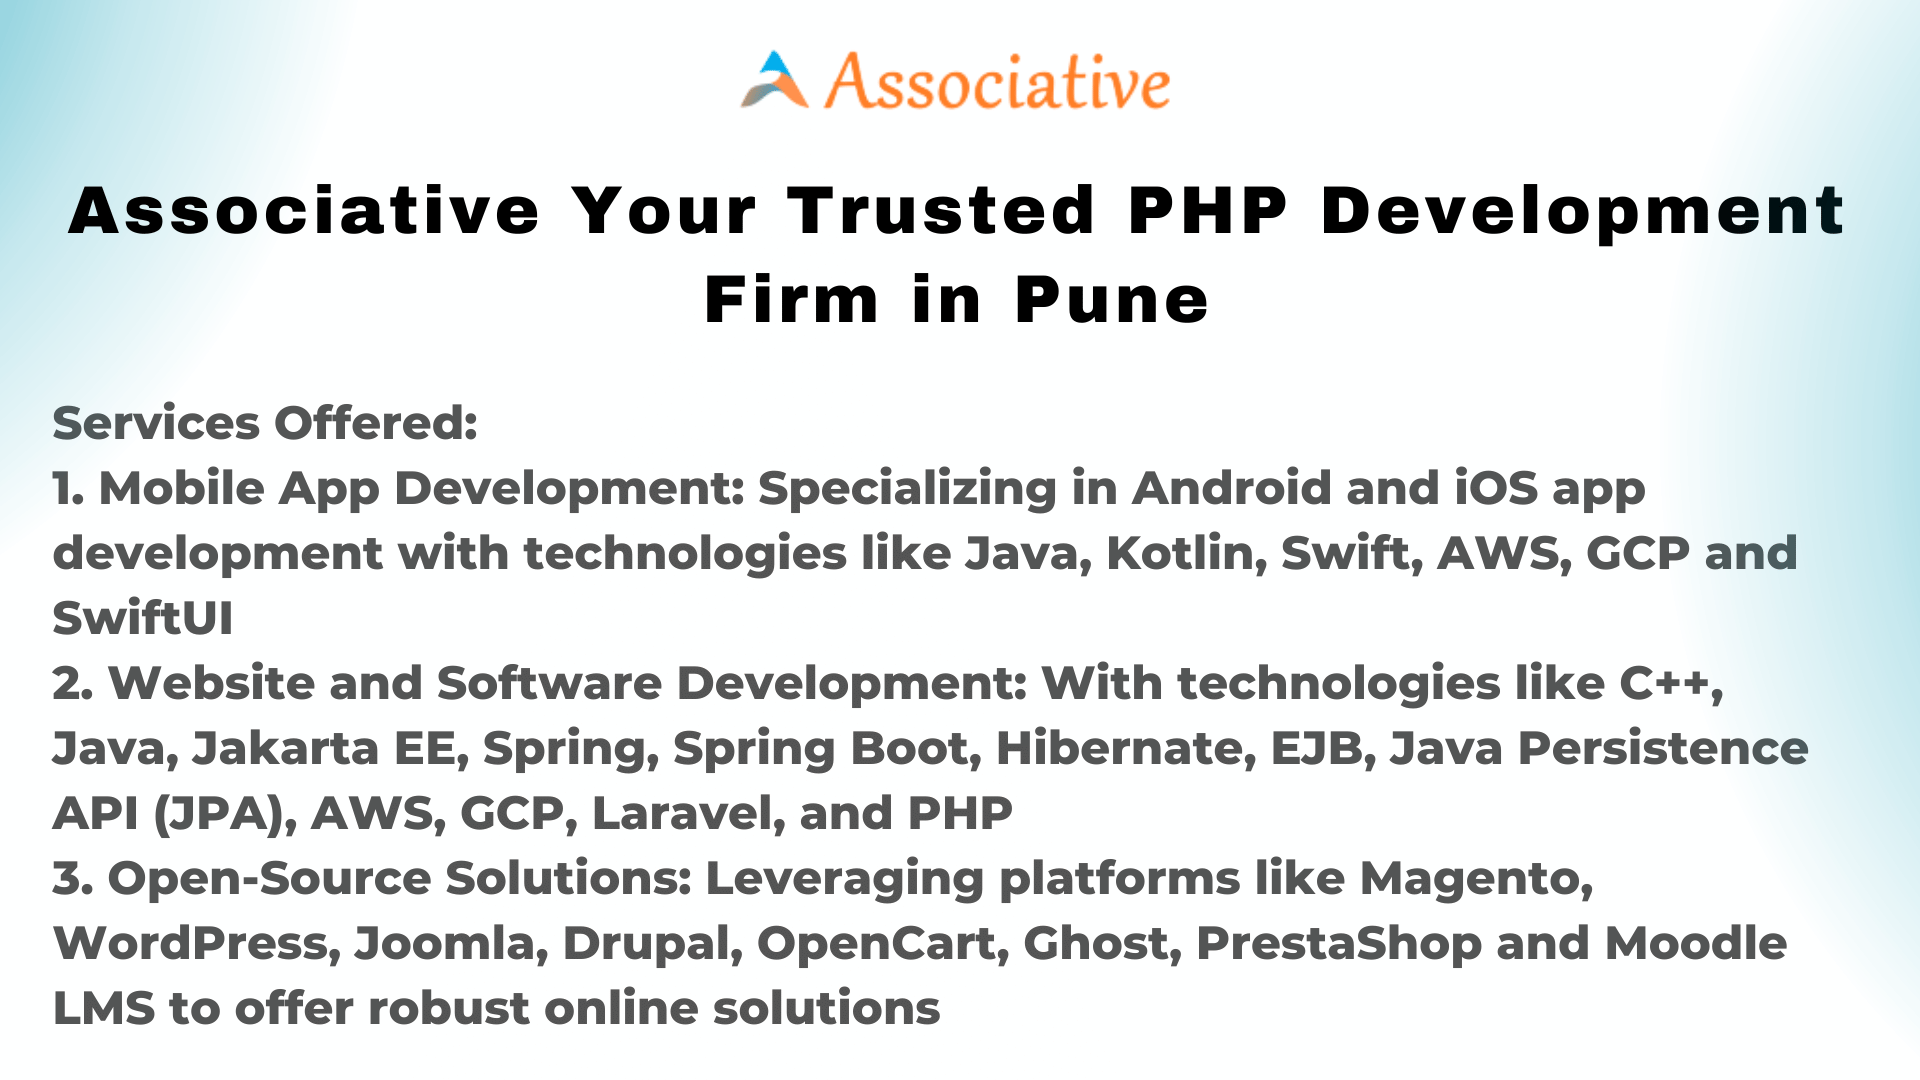 Associative Your Trusted PHP Development Firm in Pune